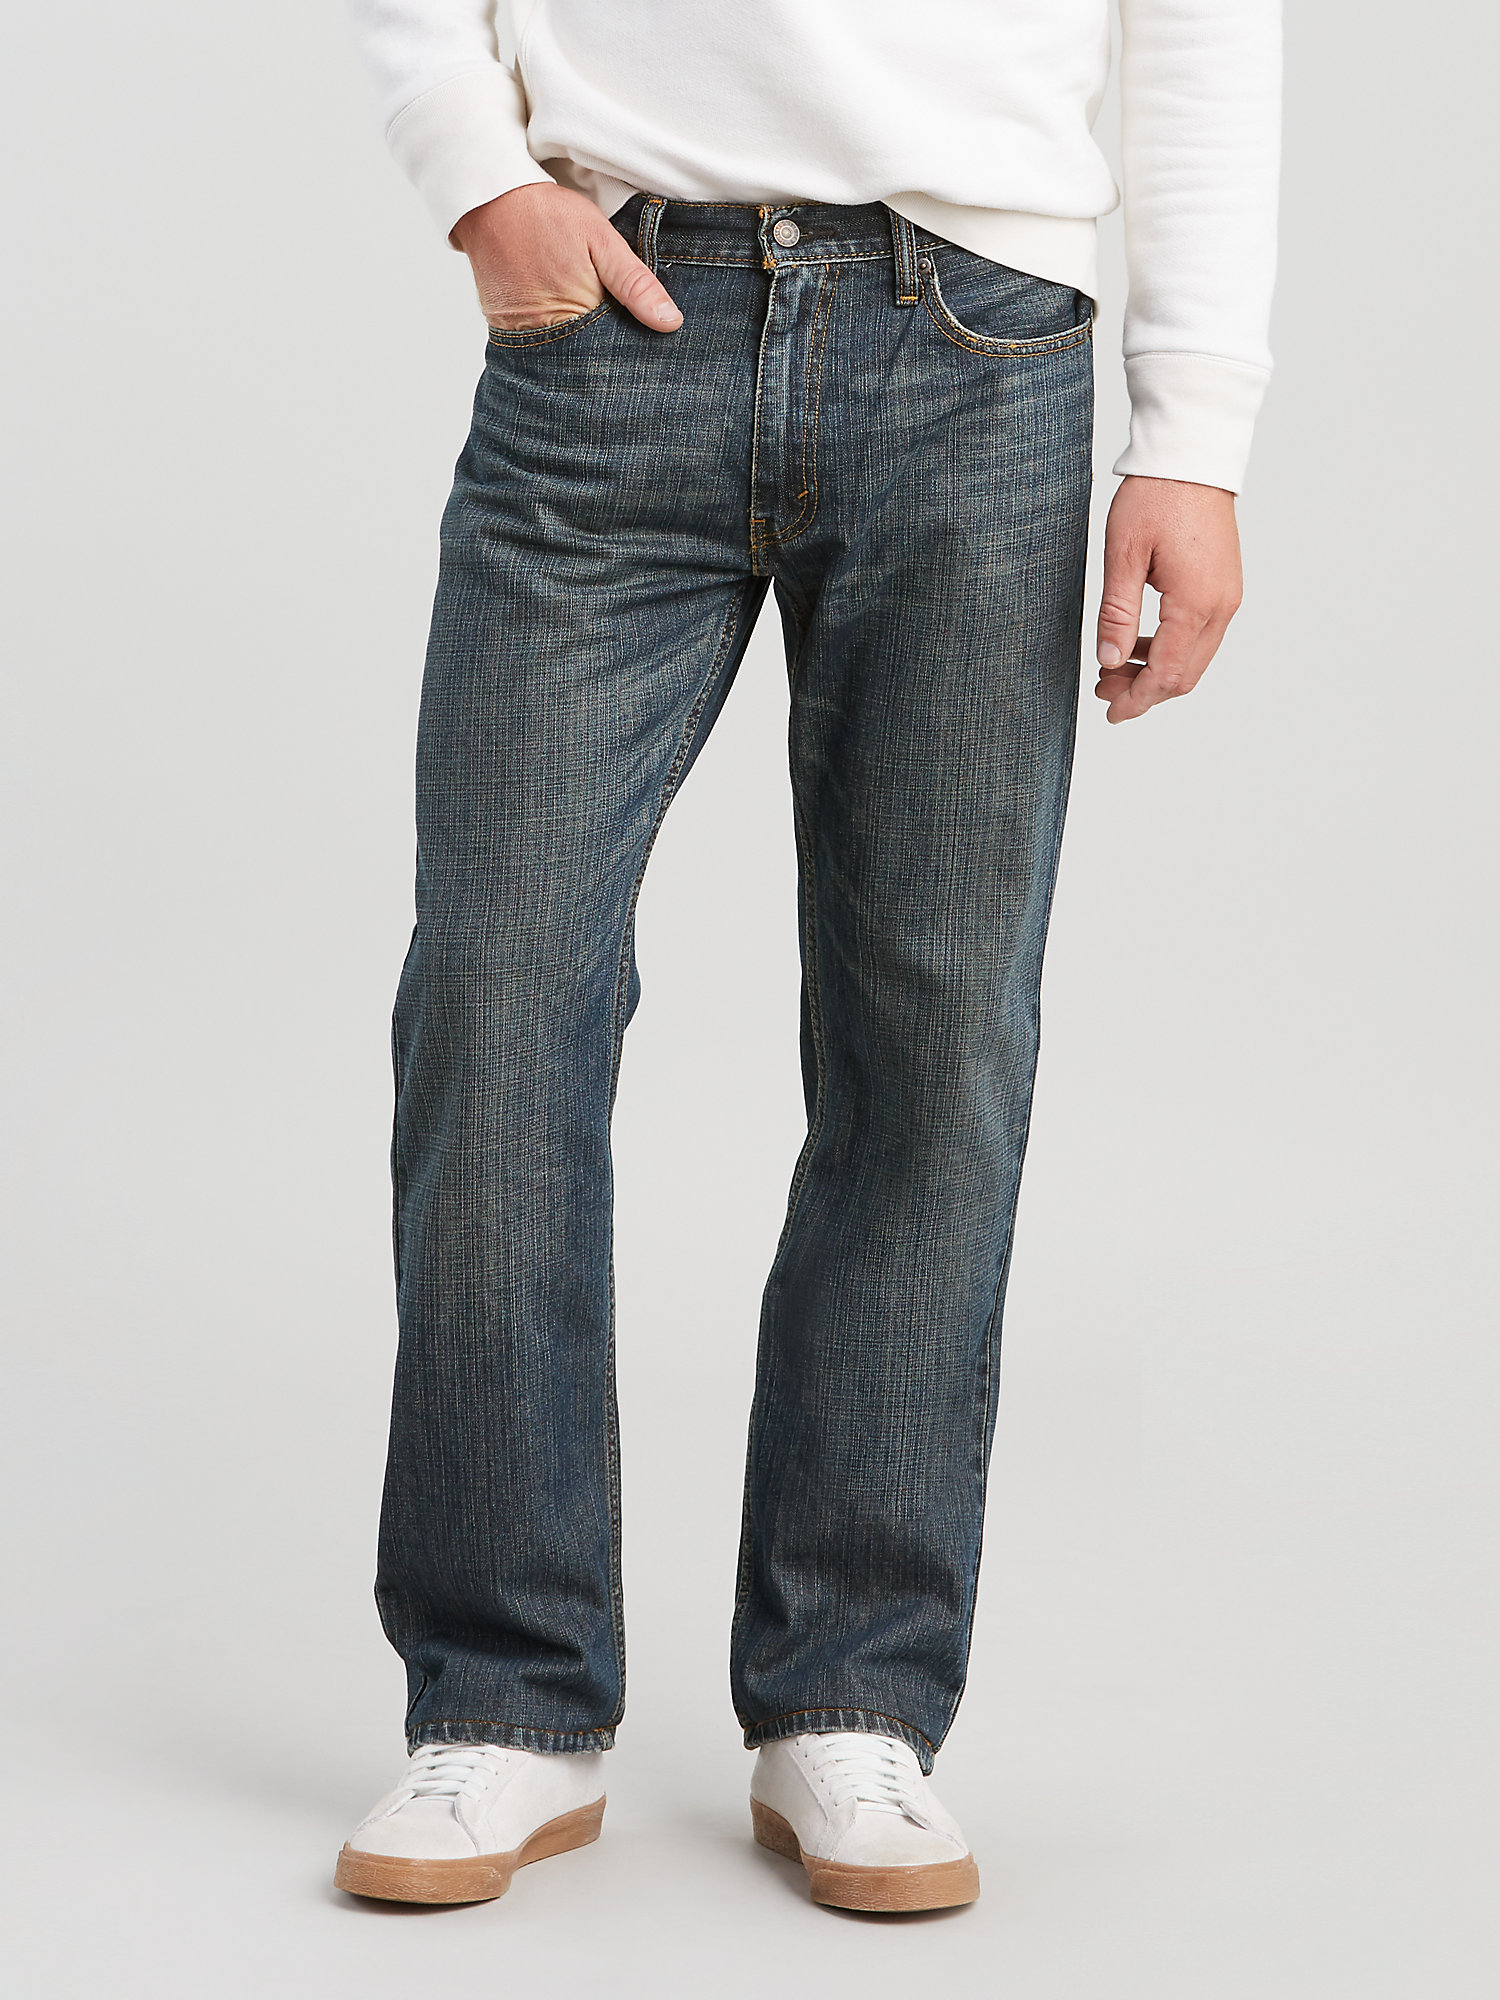 Levi's Men's Big & Tall 559 Relaxed Straight Jeans - image 1 of 6